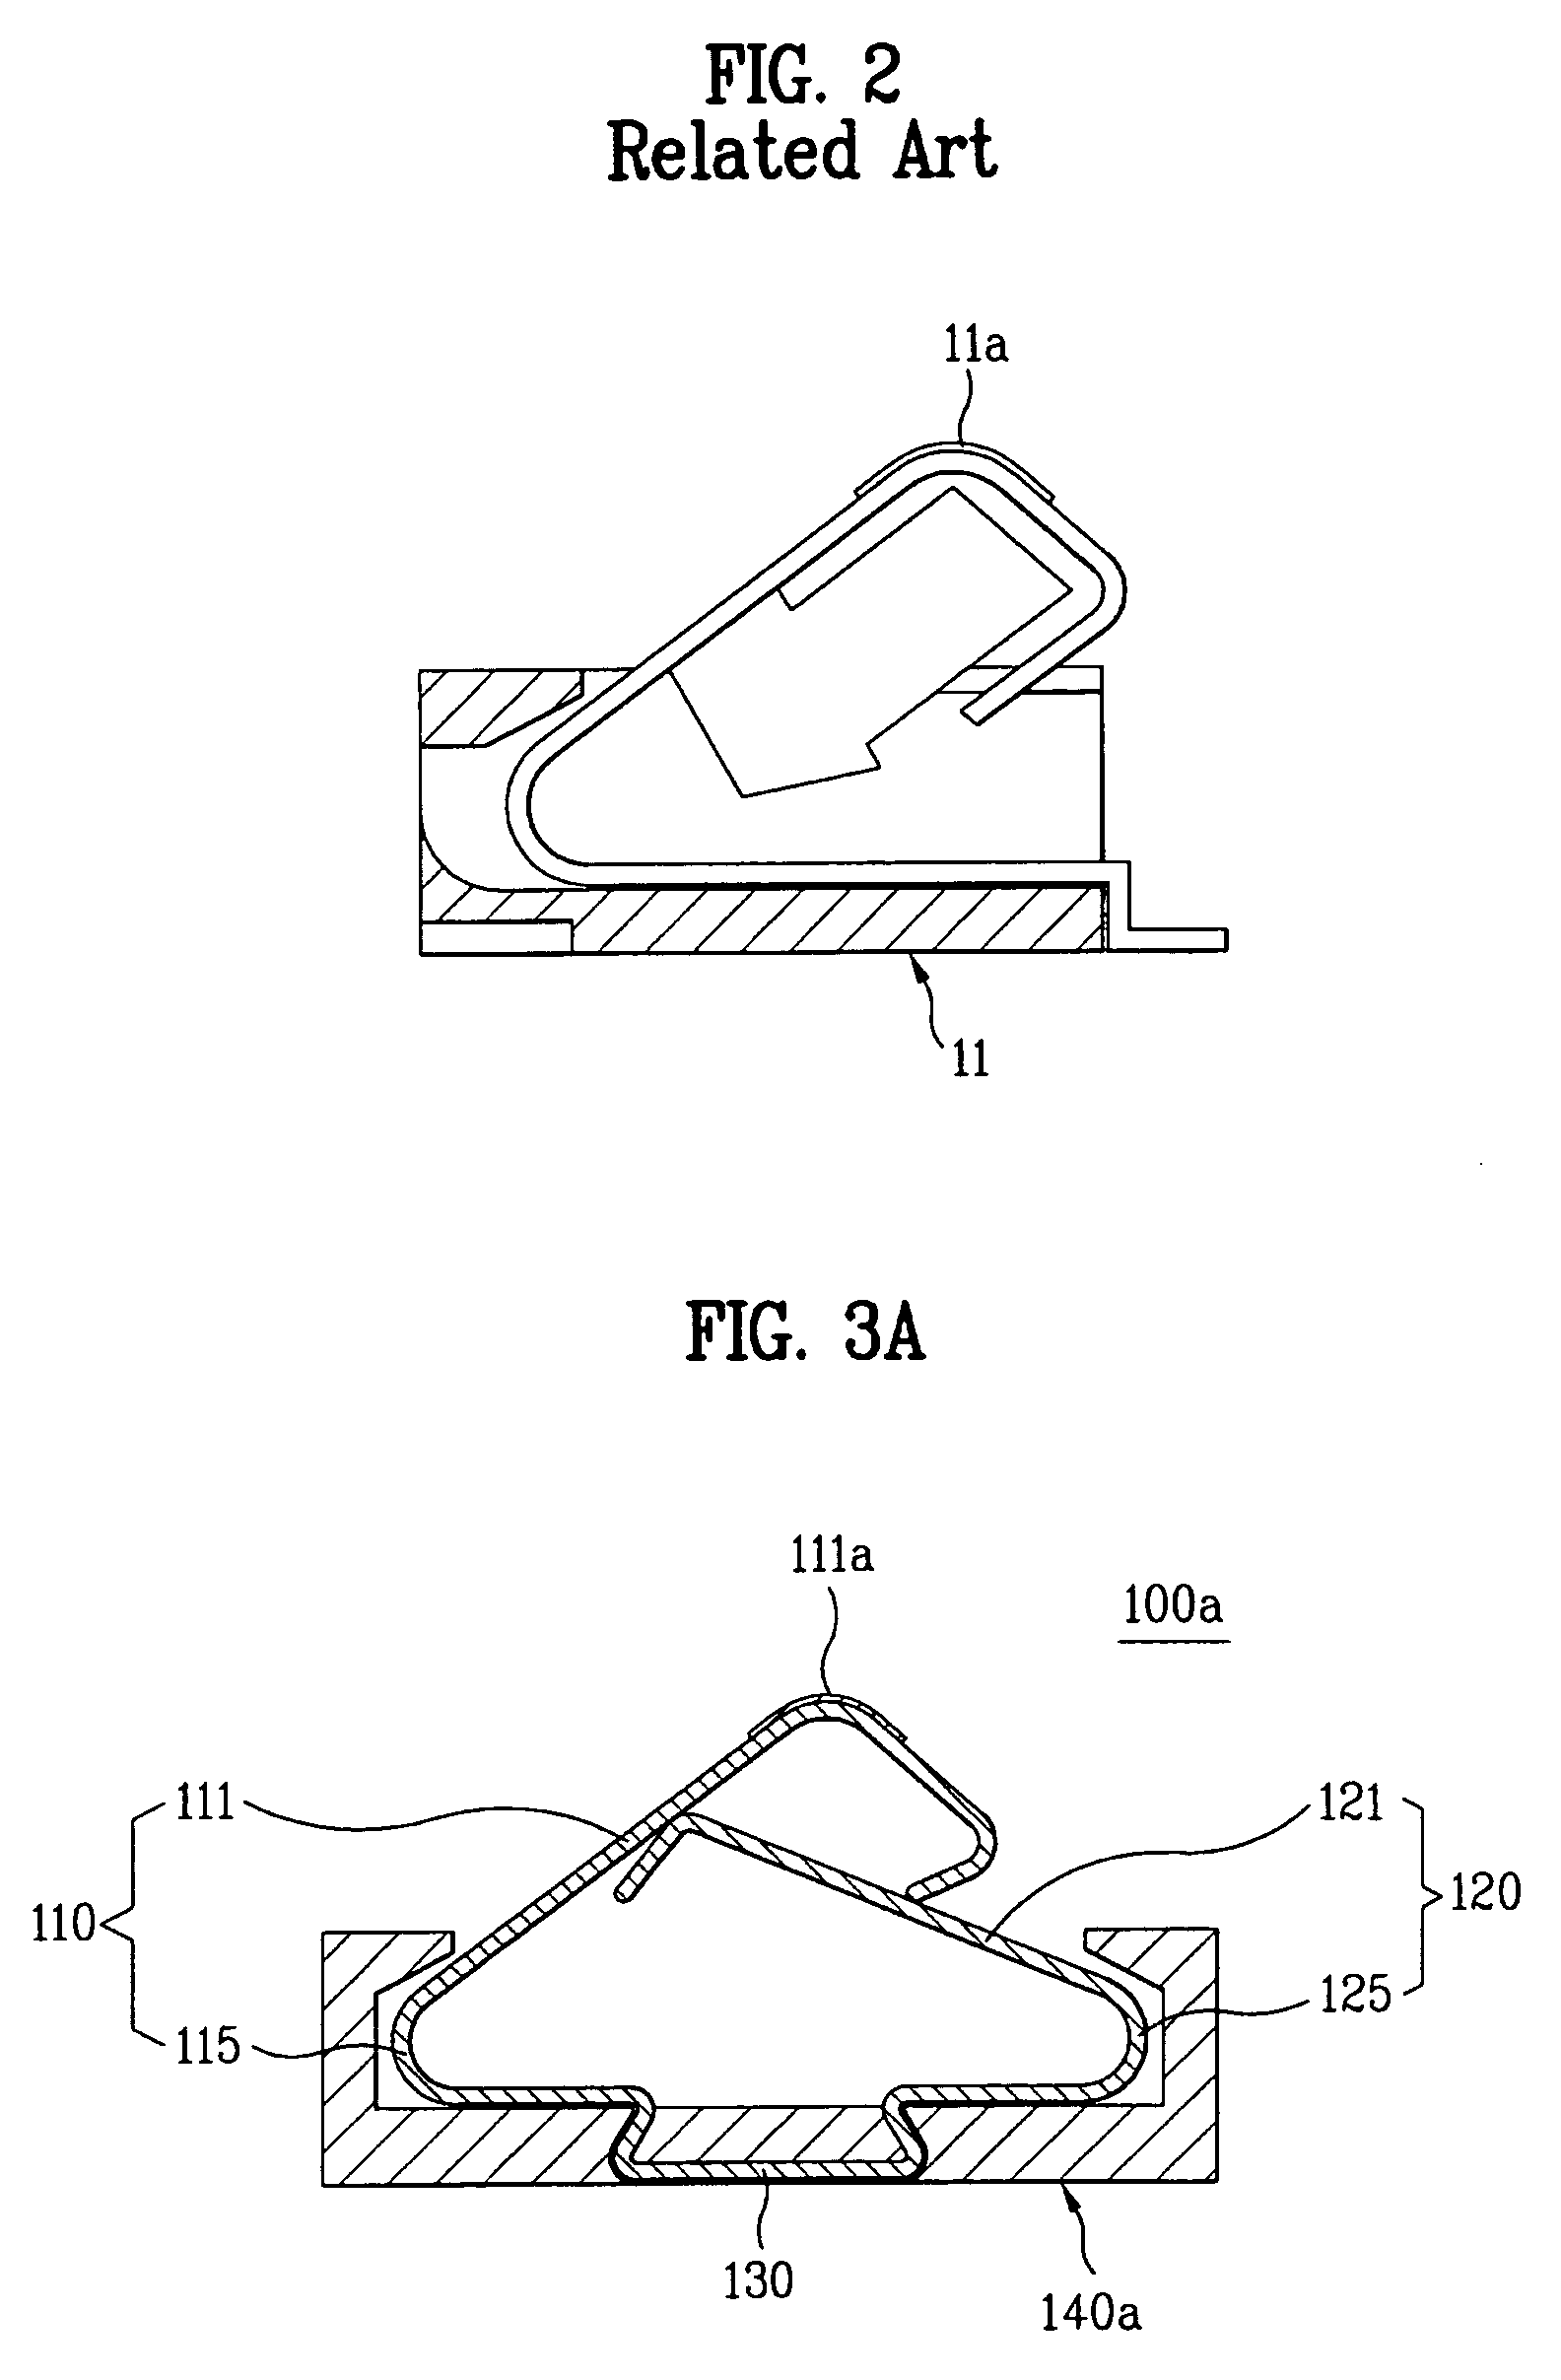 Contact for a portable electronic device